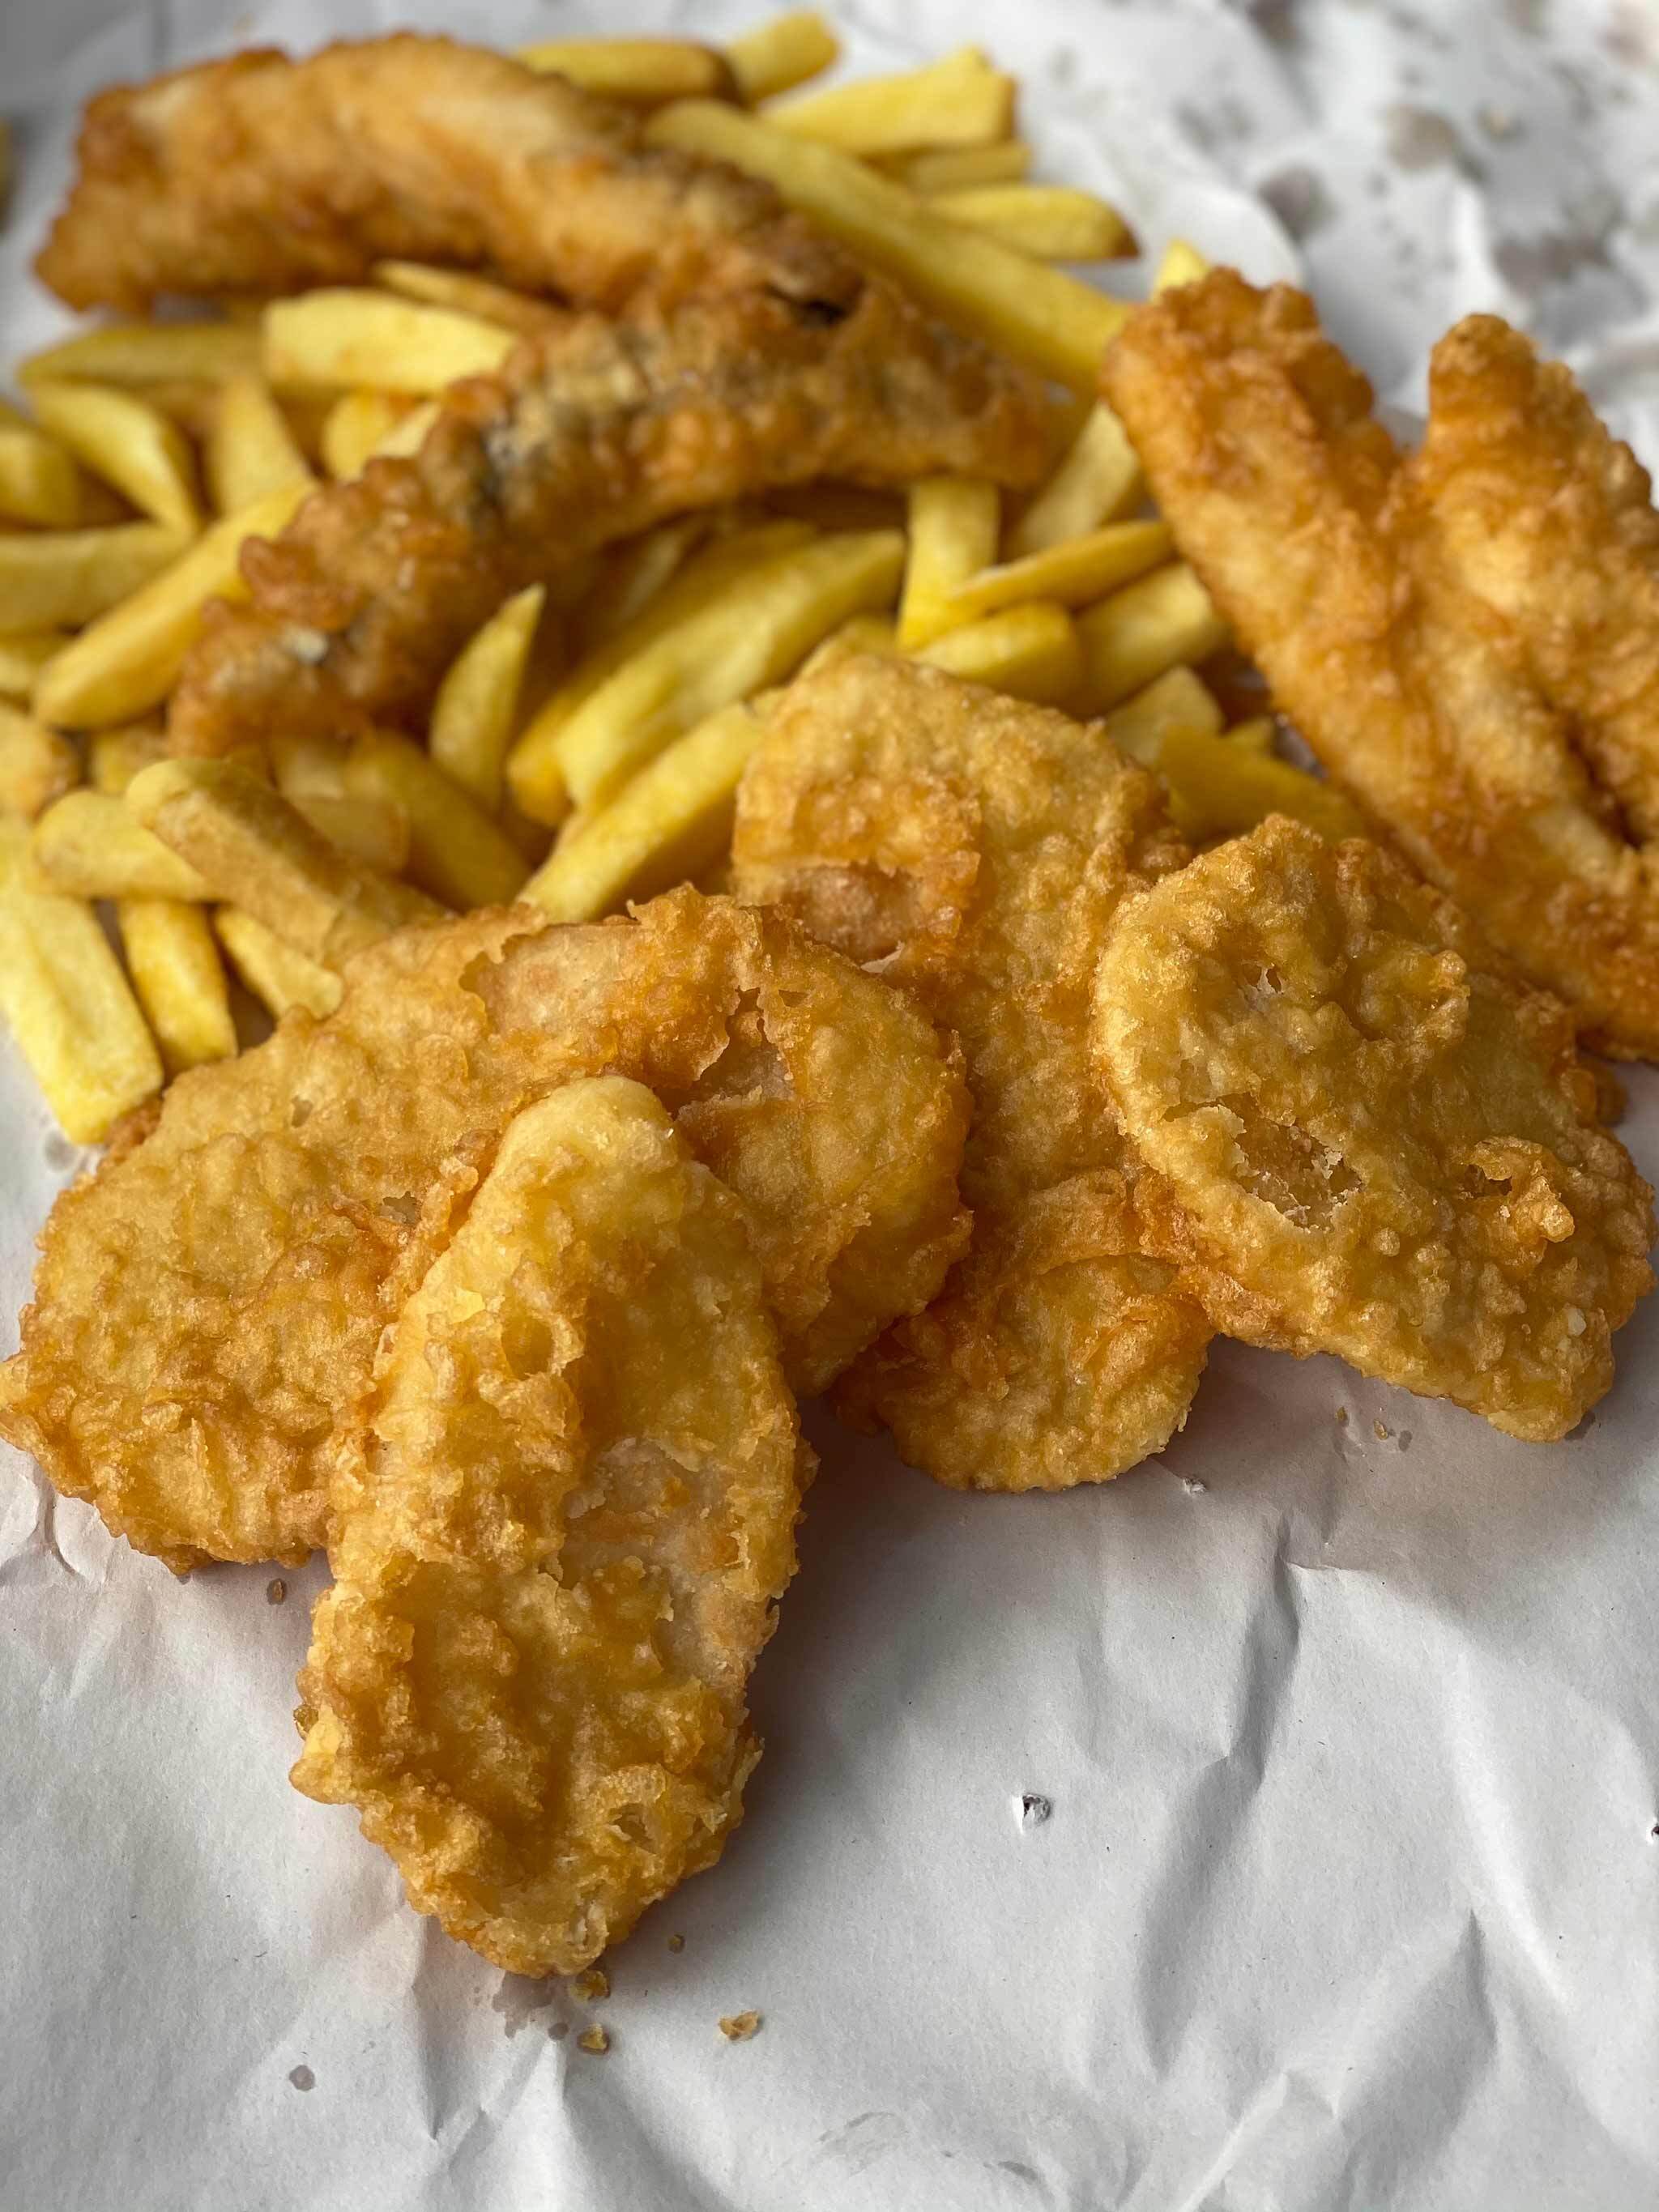 Photo of potato fritters, fish and chips on paper